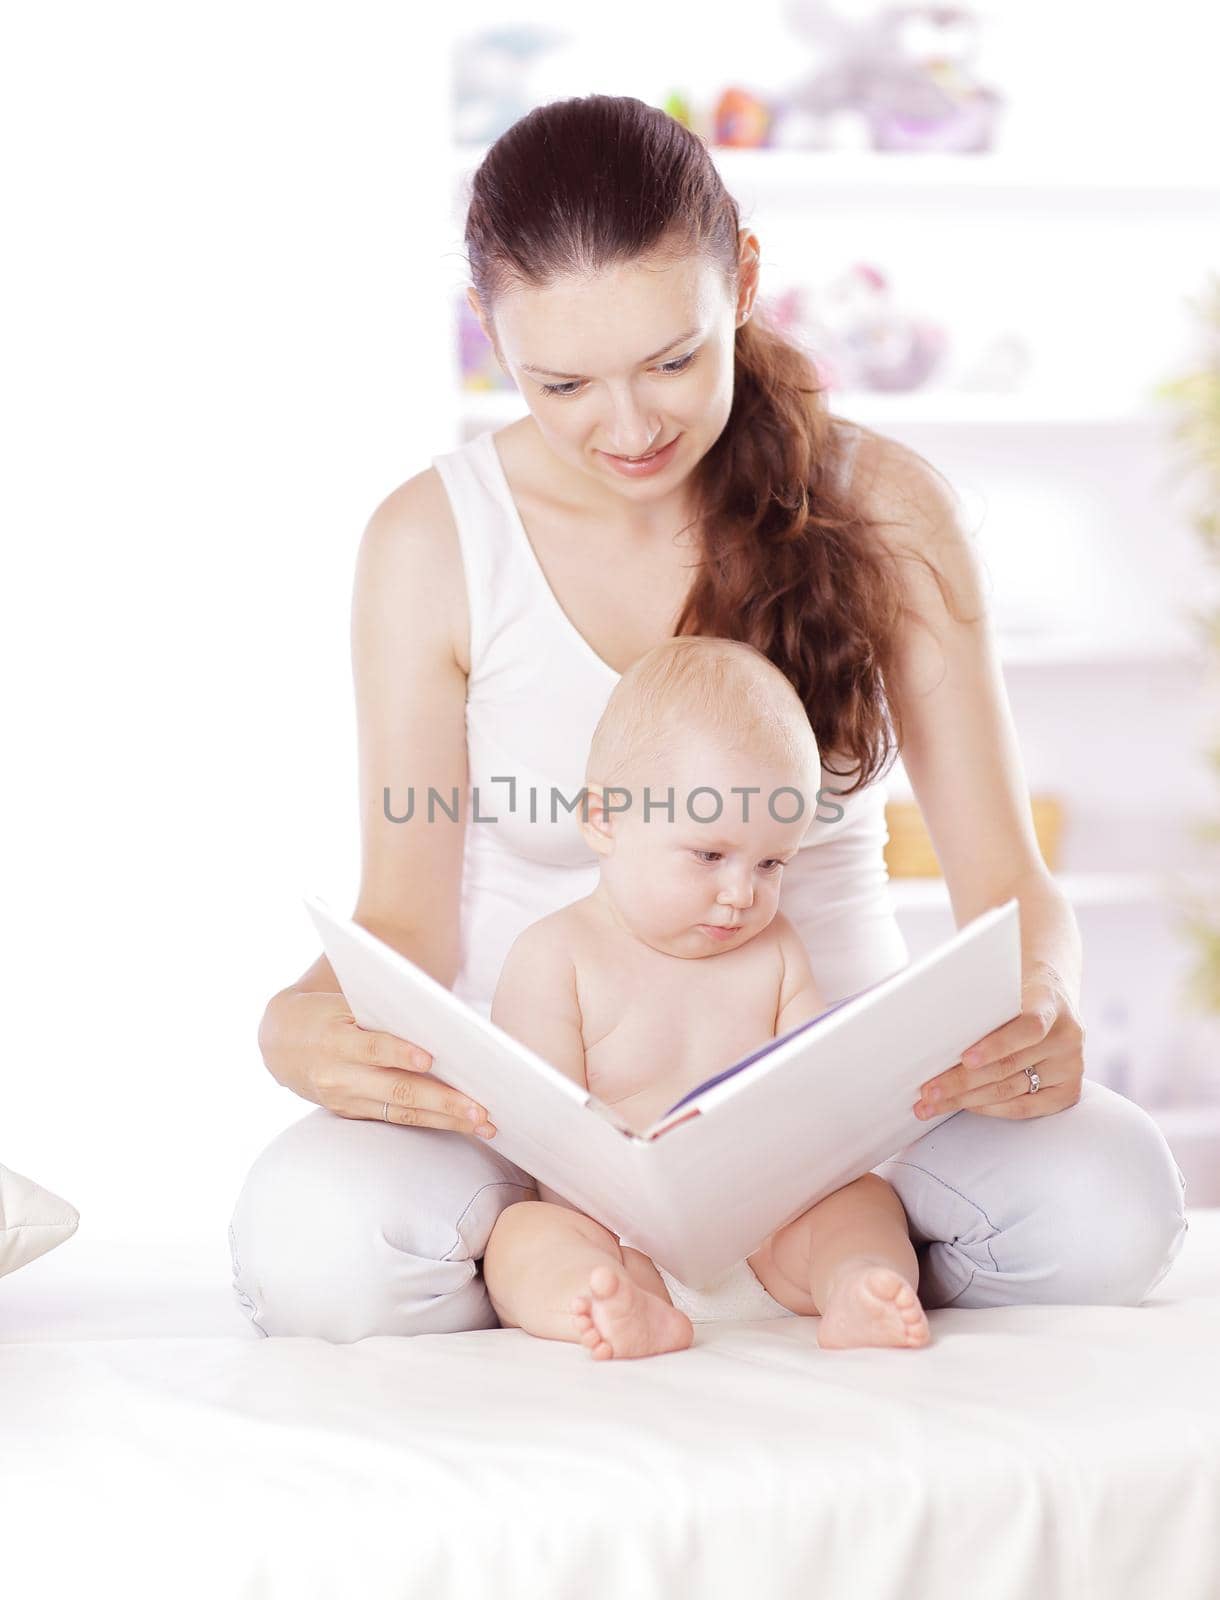 charming mom reading a book to her baby.concept of education